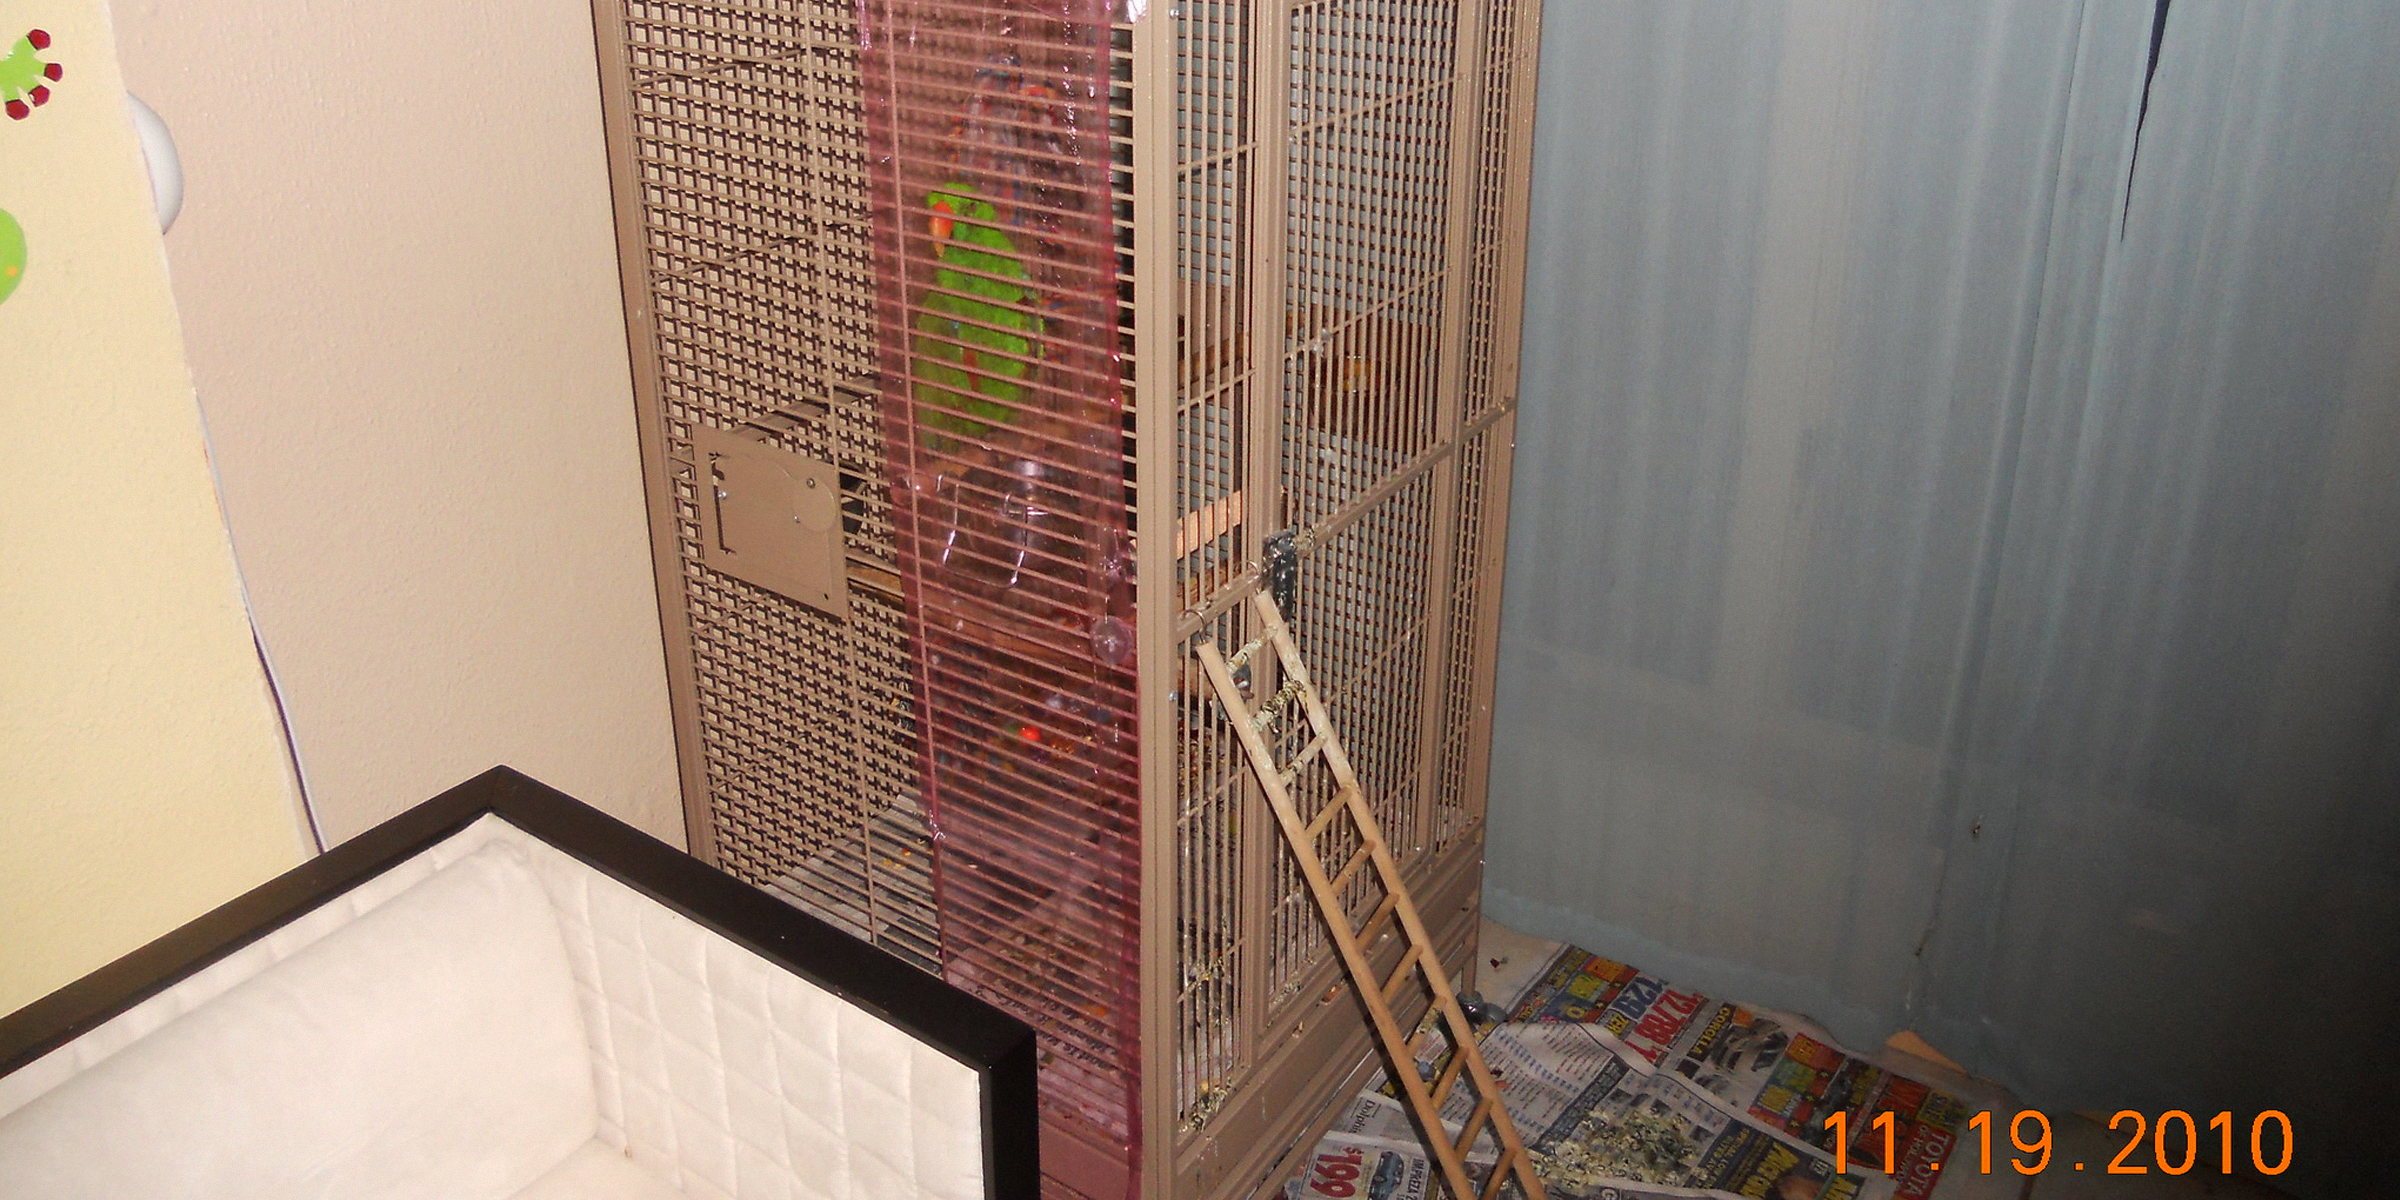 A green parrot in a cage | Source: Flickr